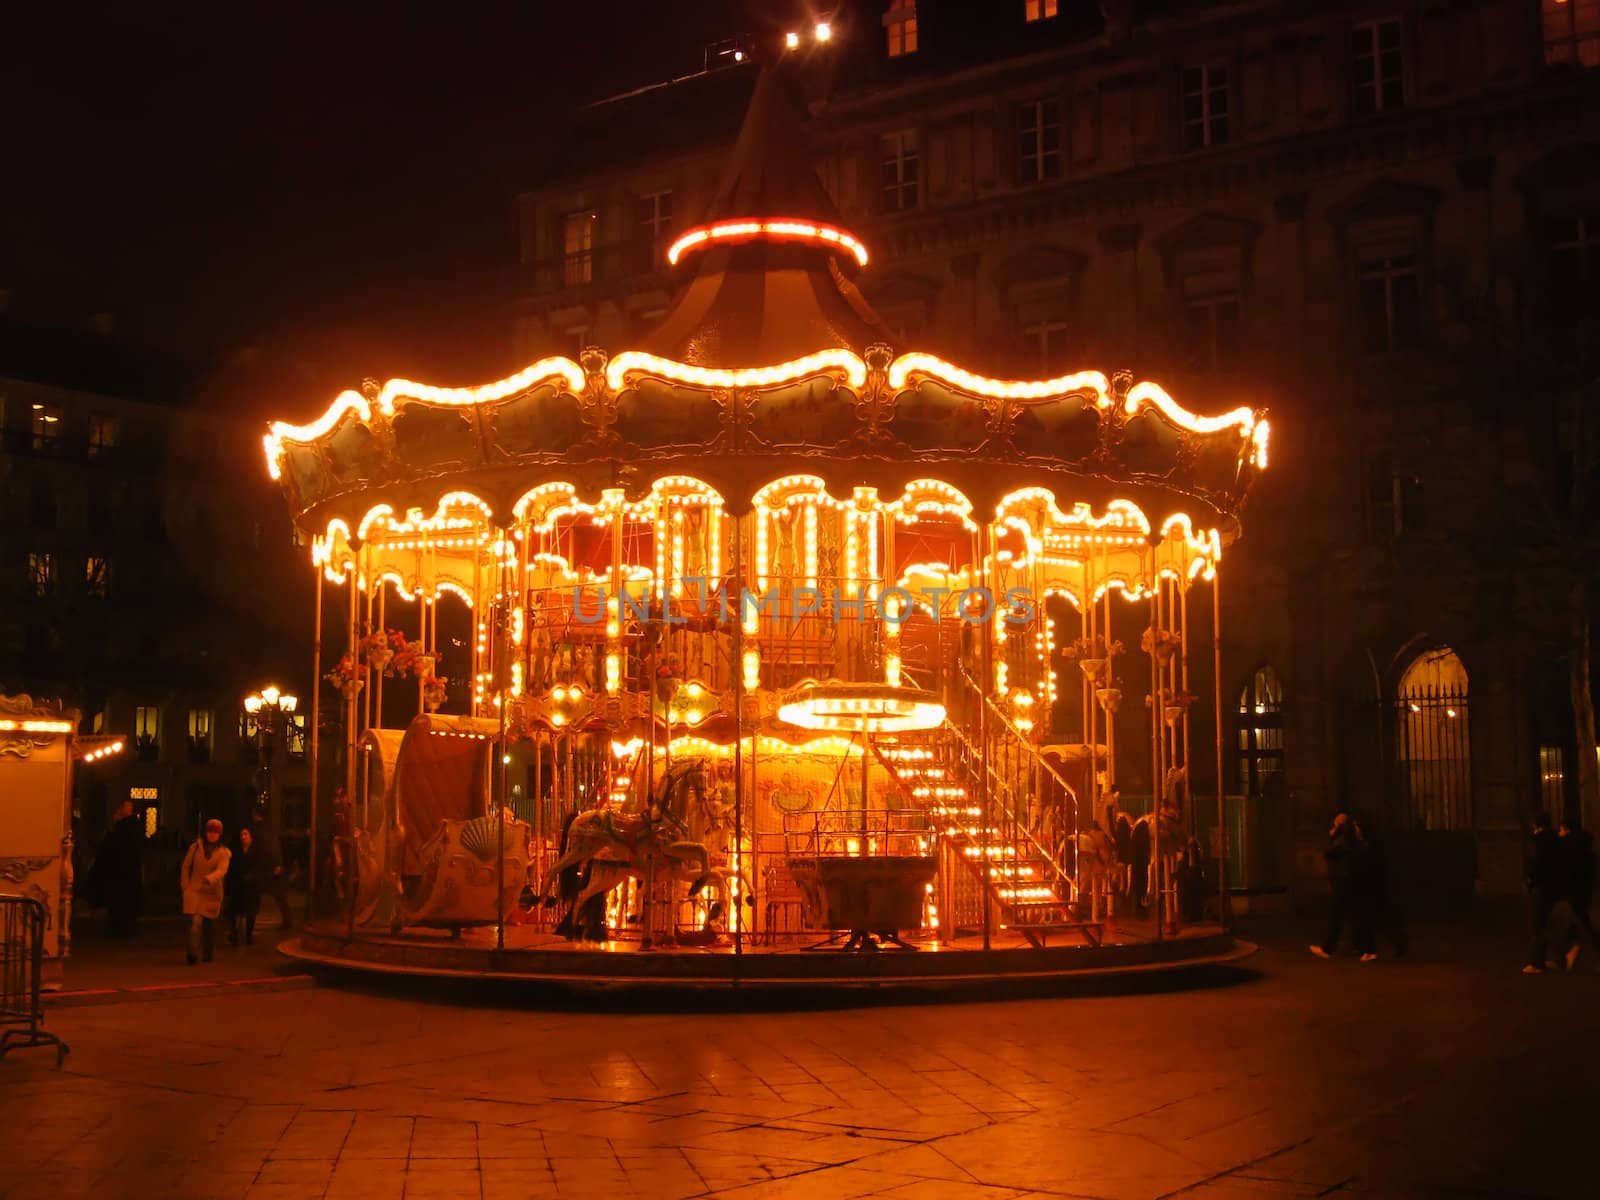 Lights of a merry-go-round in the night